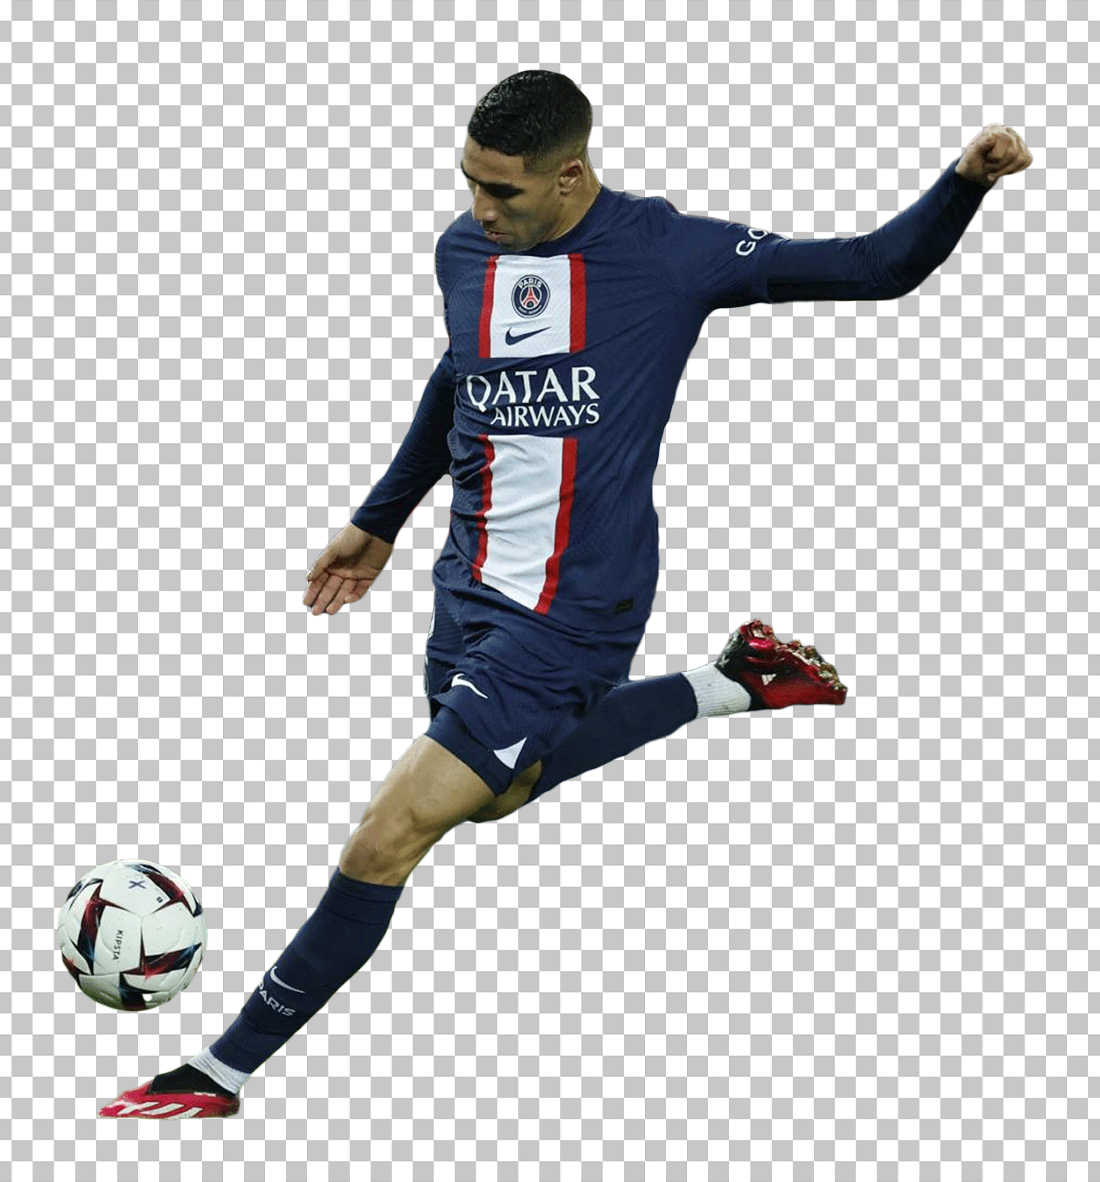 Achraf Hakimi shooting the ball and wearing PSG jersey.